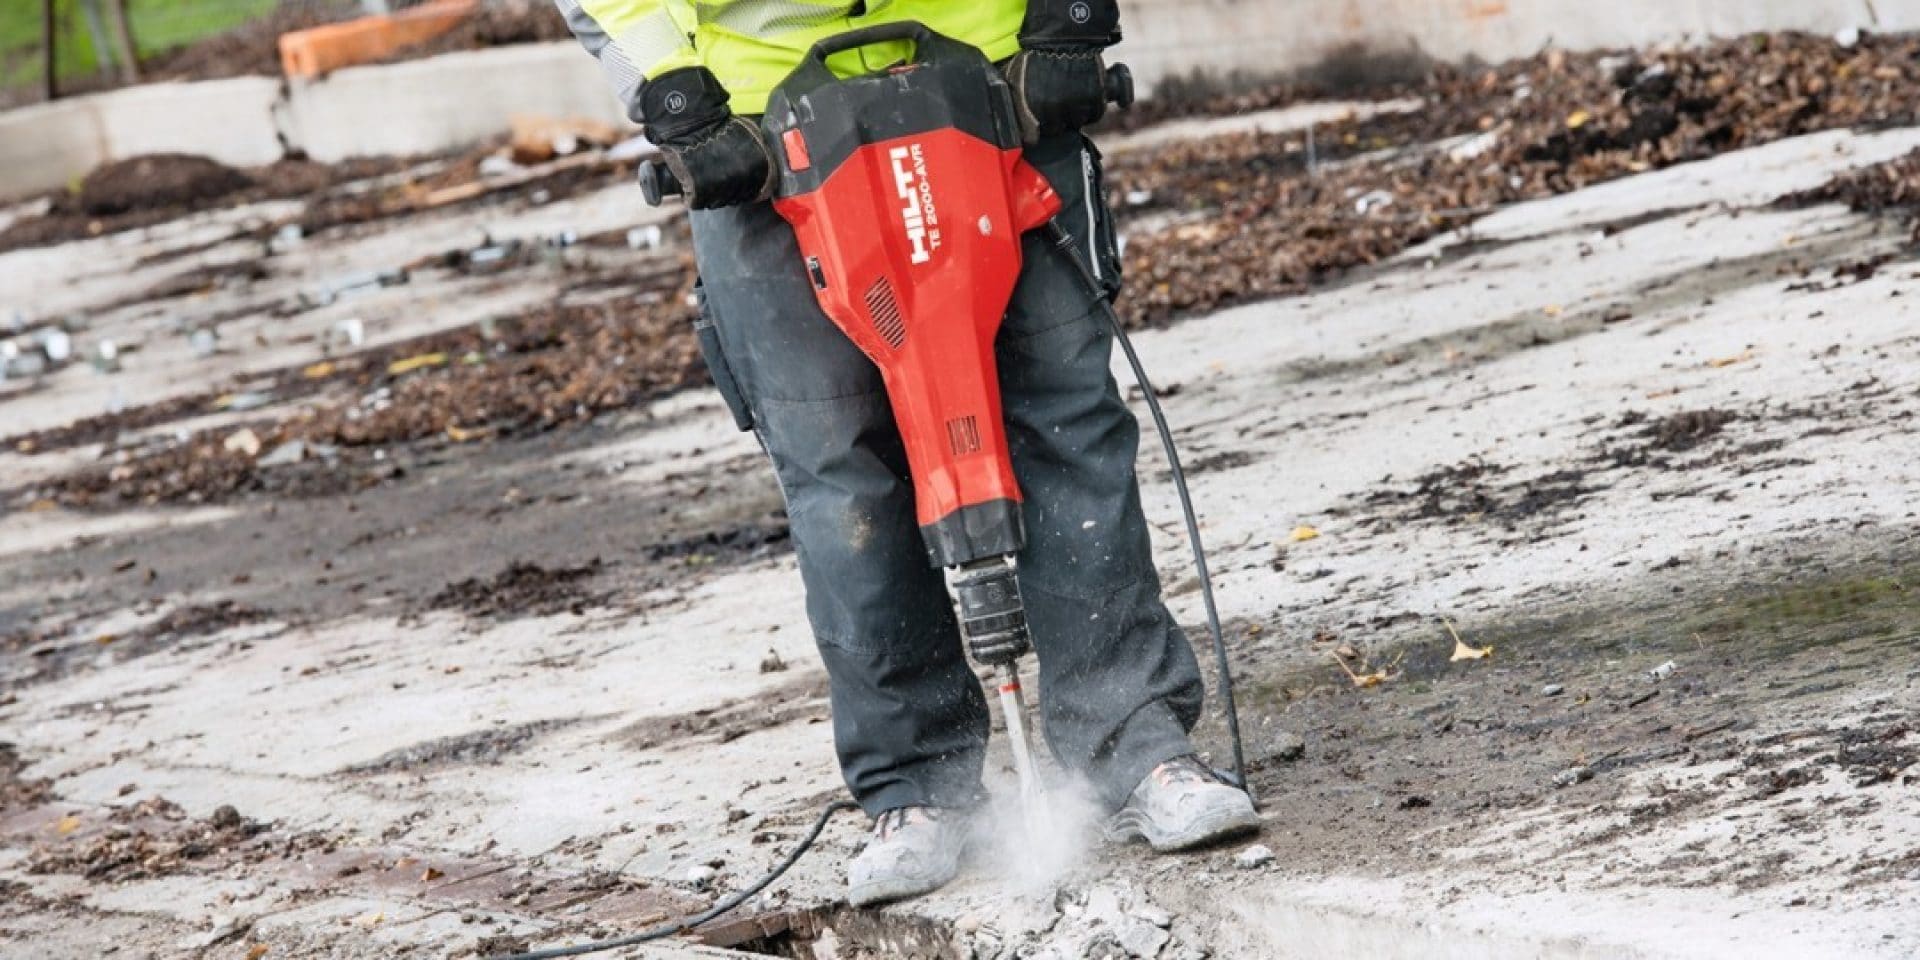 Hilti TE 2000-AVR demolition tool with best power-to-weight ratio